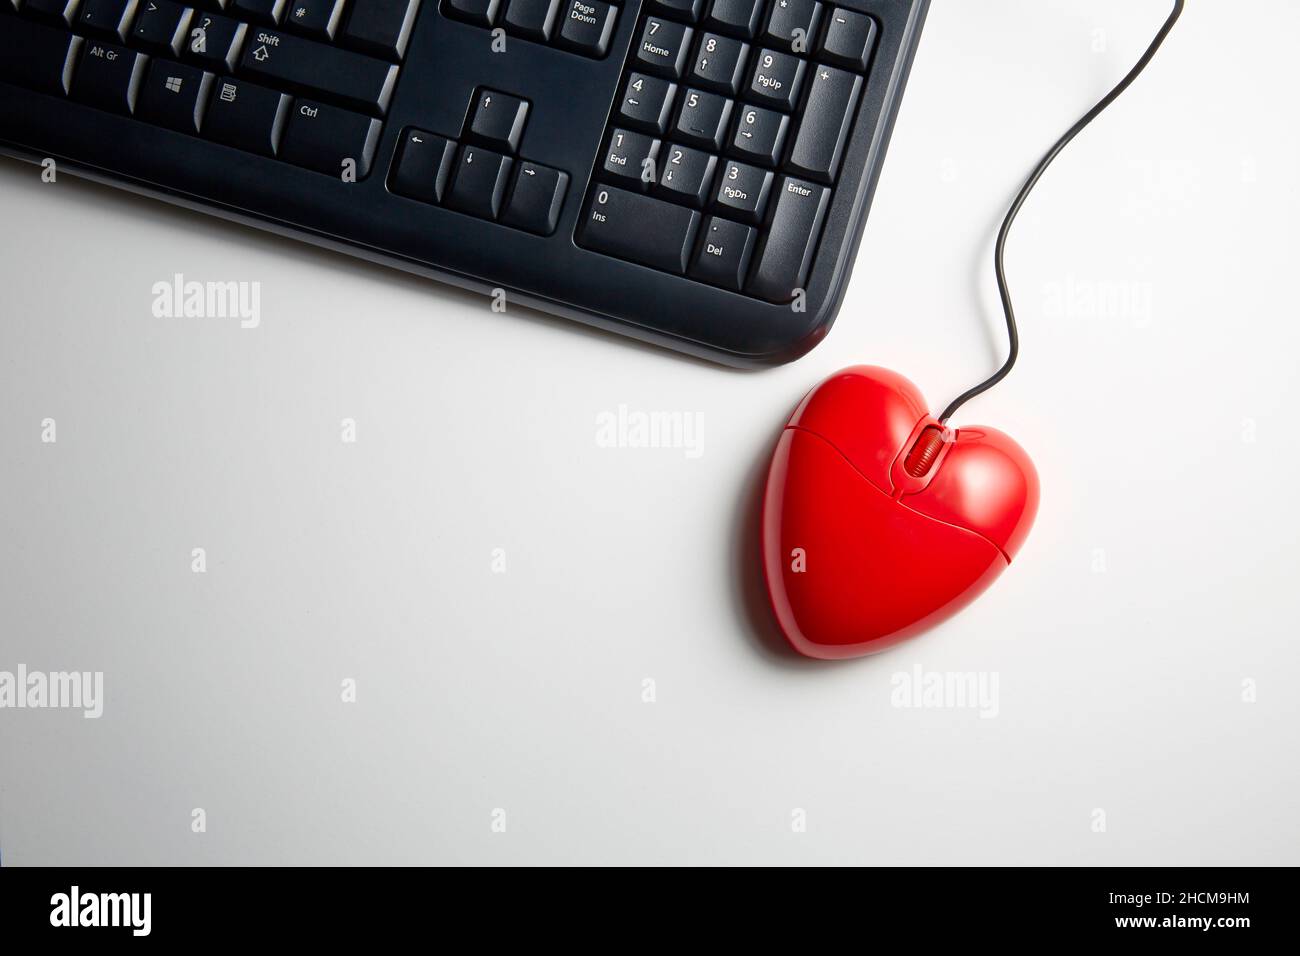 HEART SHAPED COMPUTER MOUSE Stock Photo